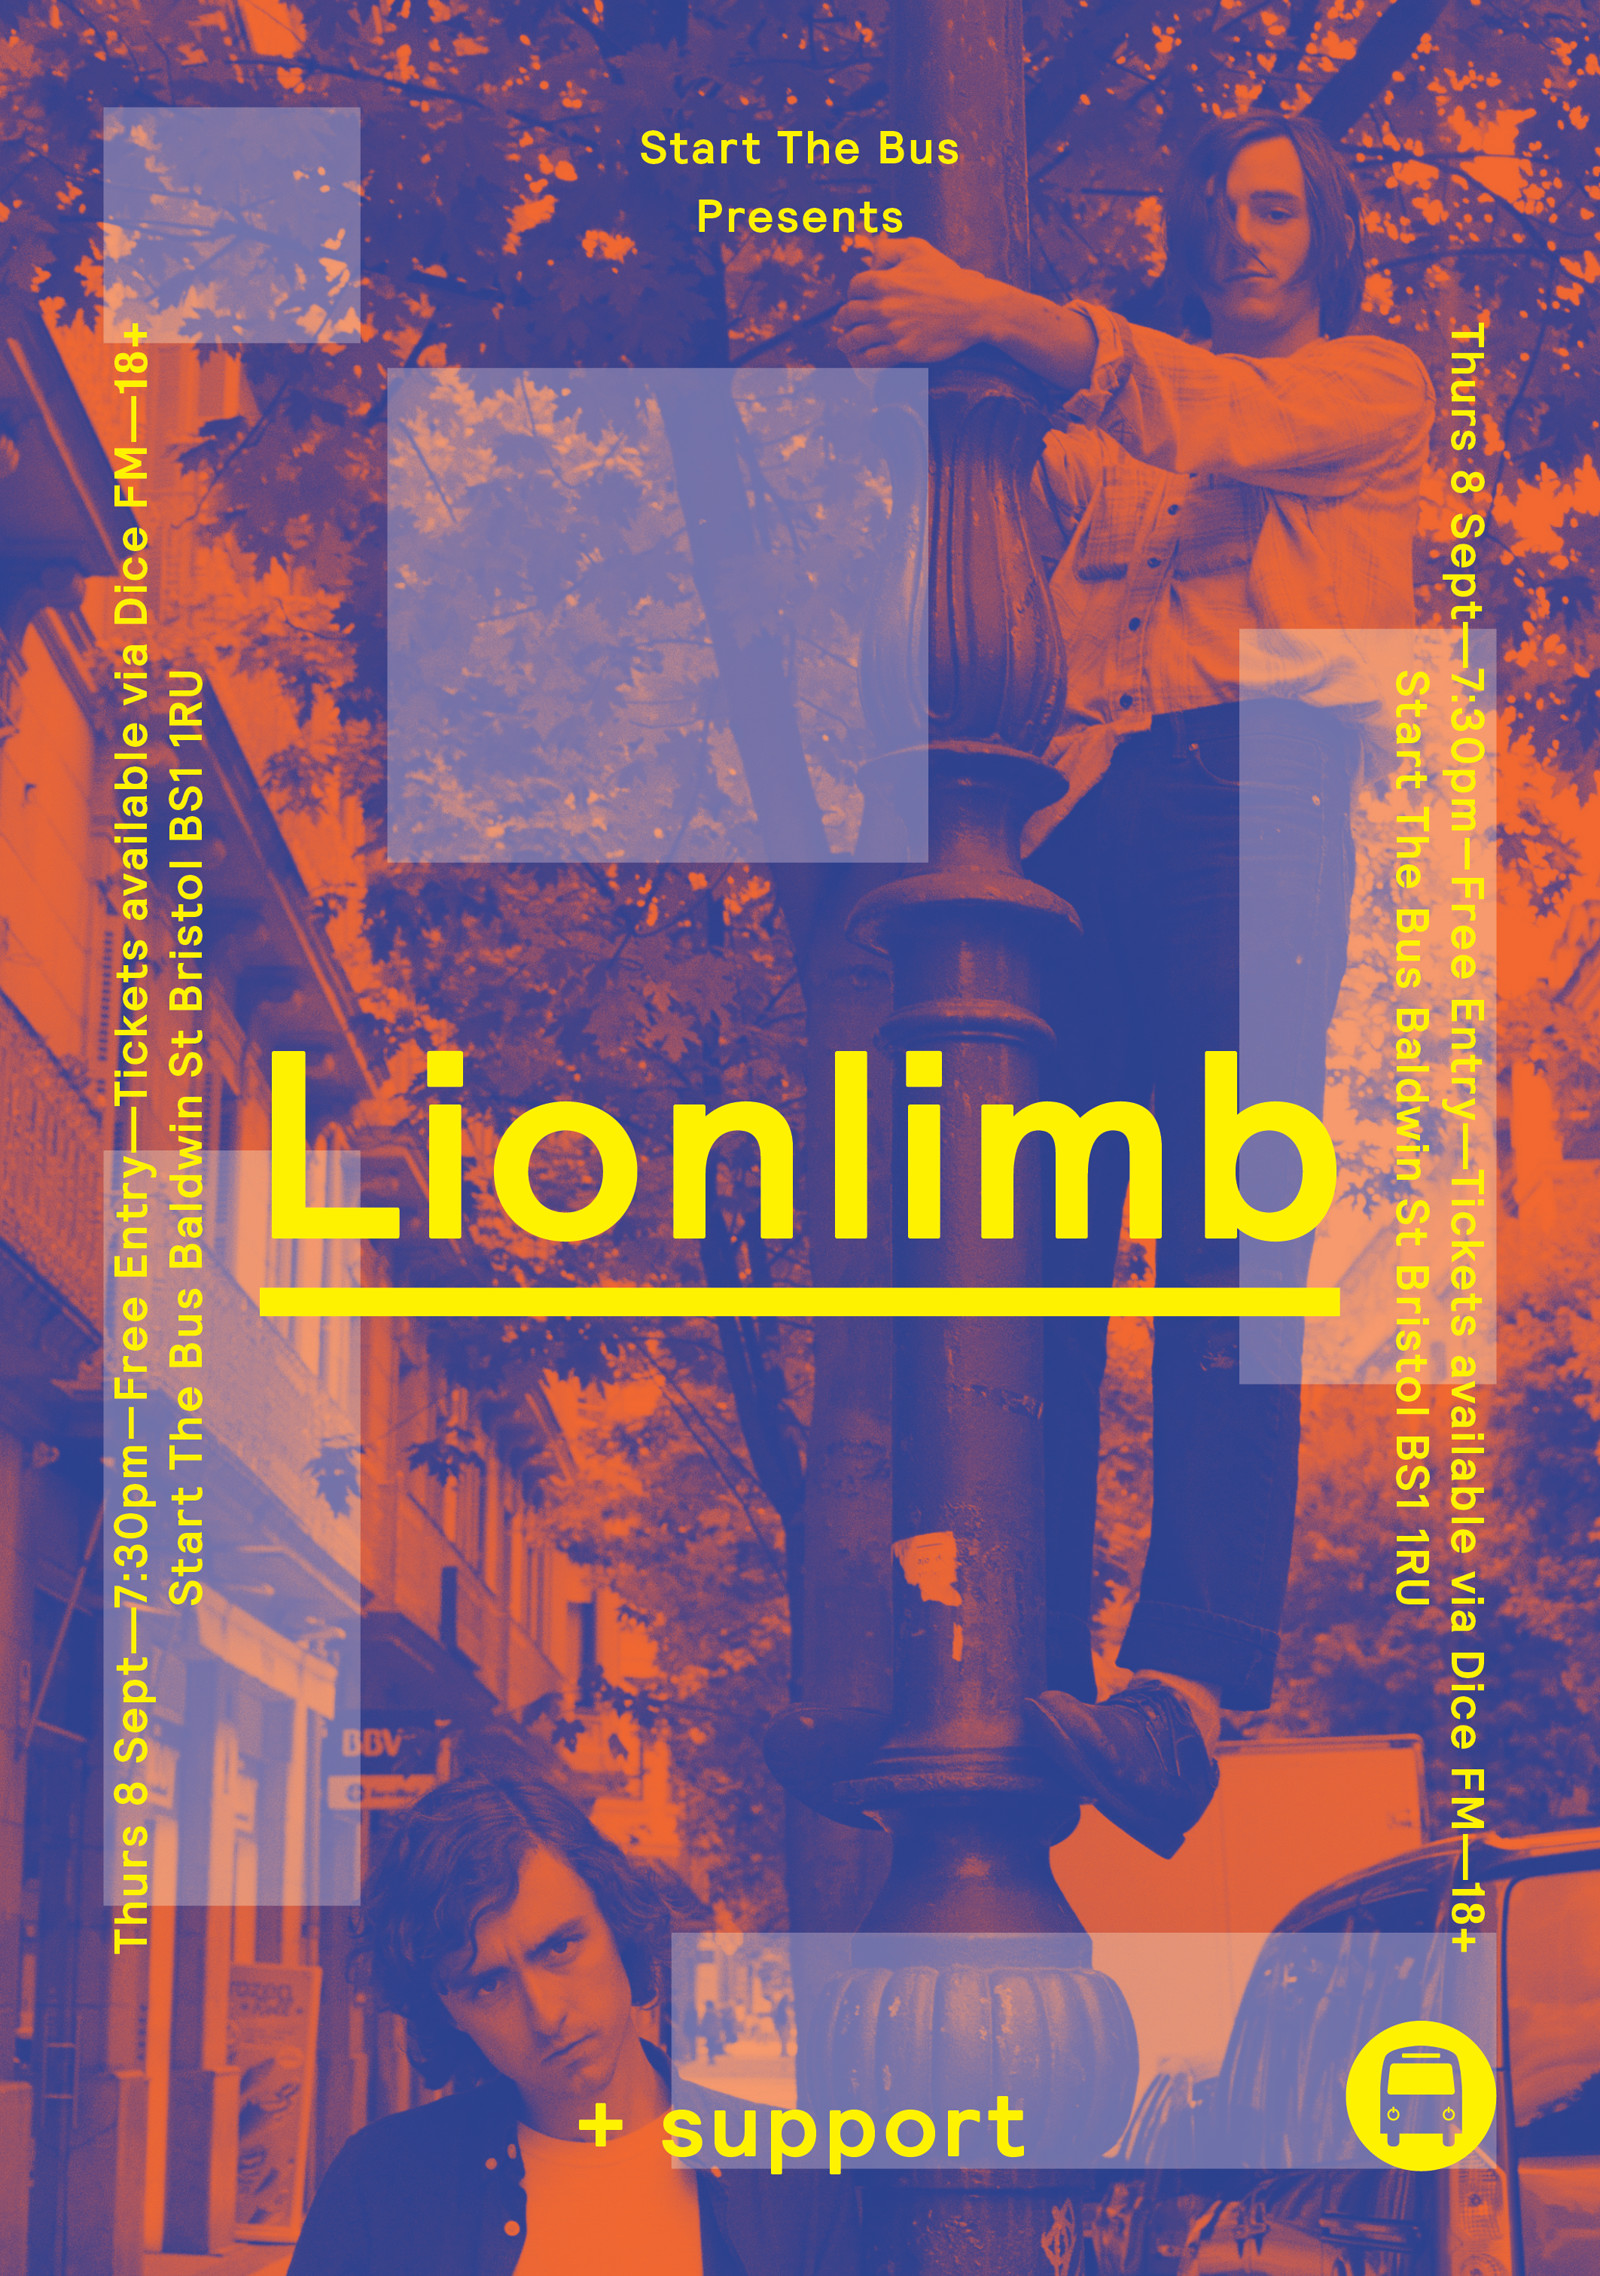 LionLimb + Support TBA at Start The Bus